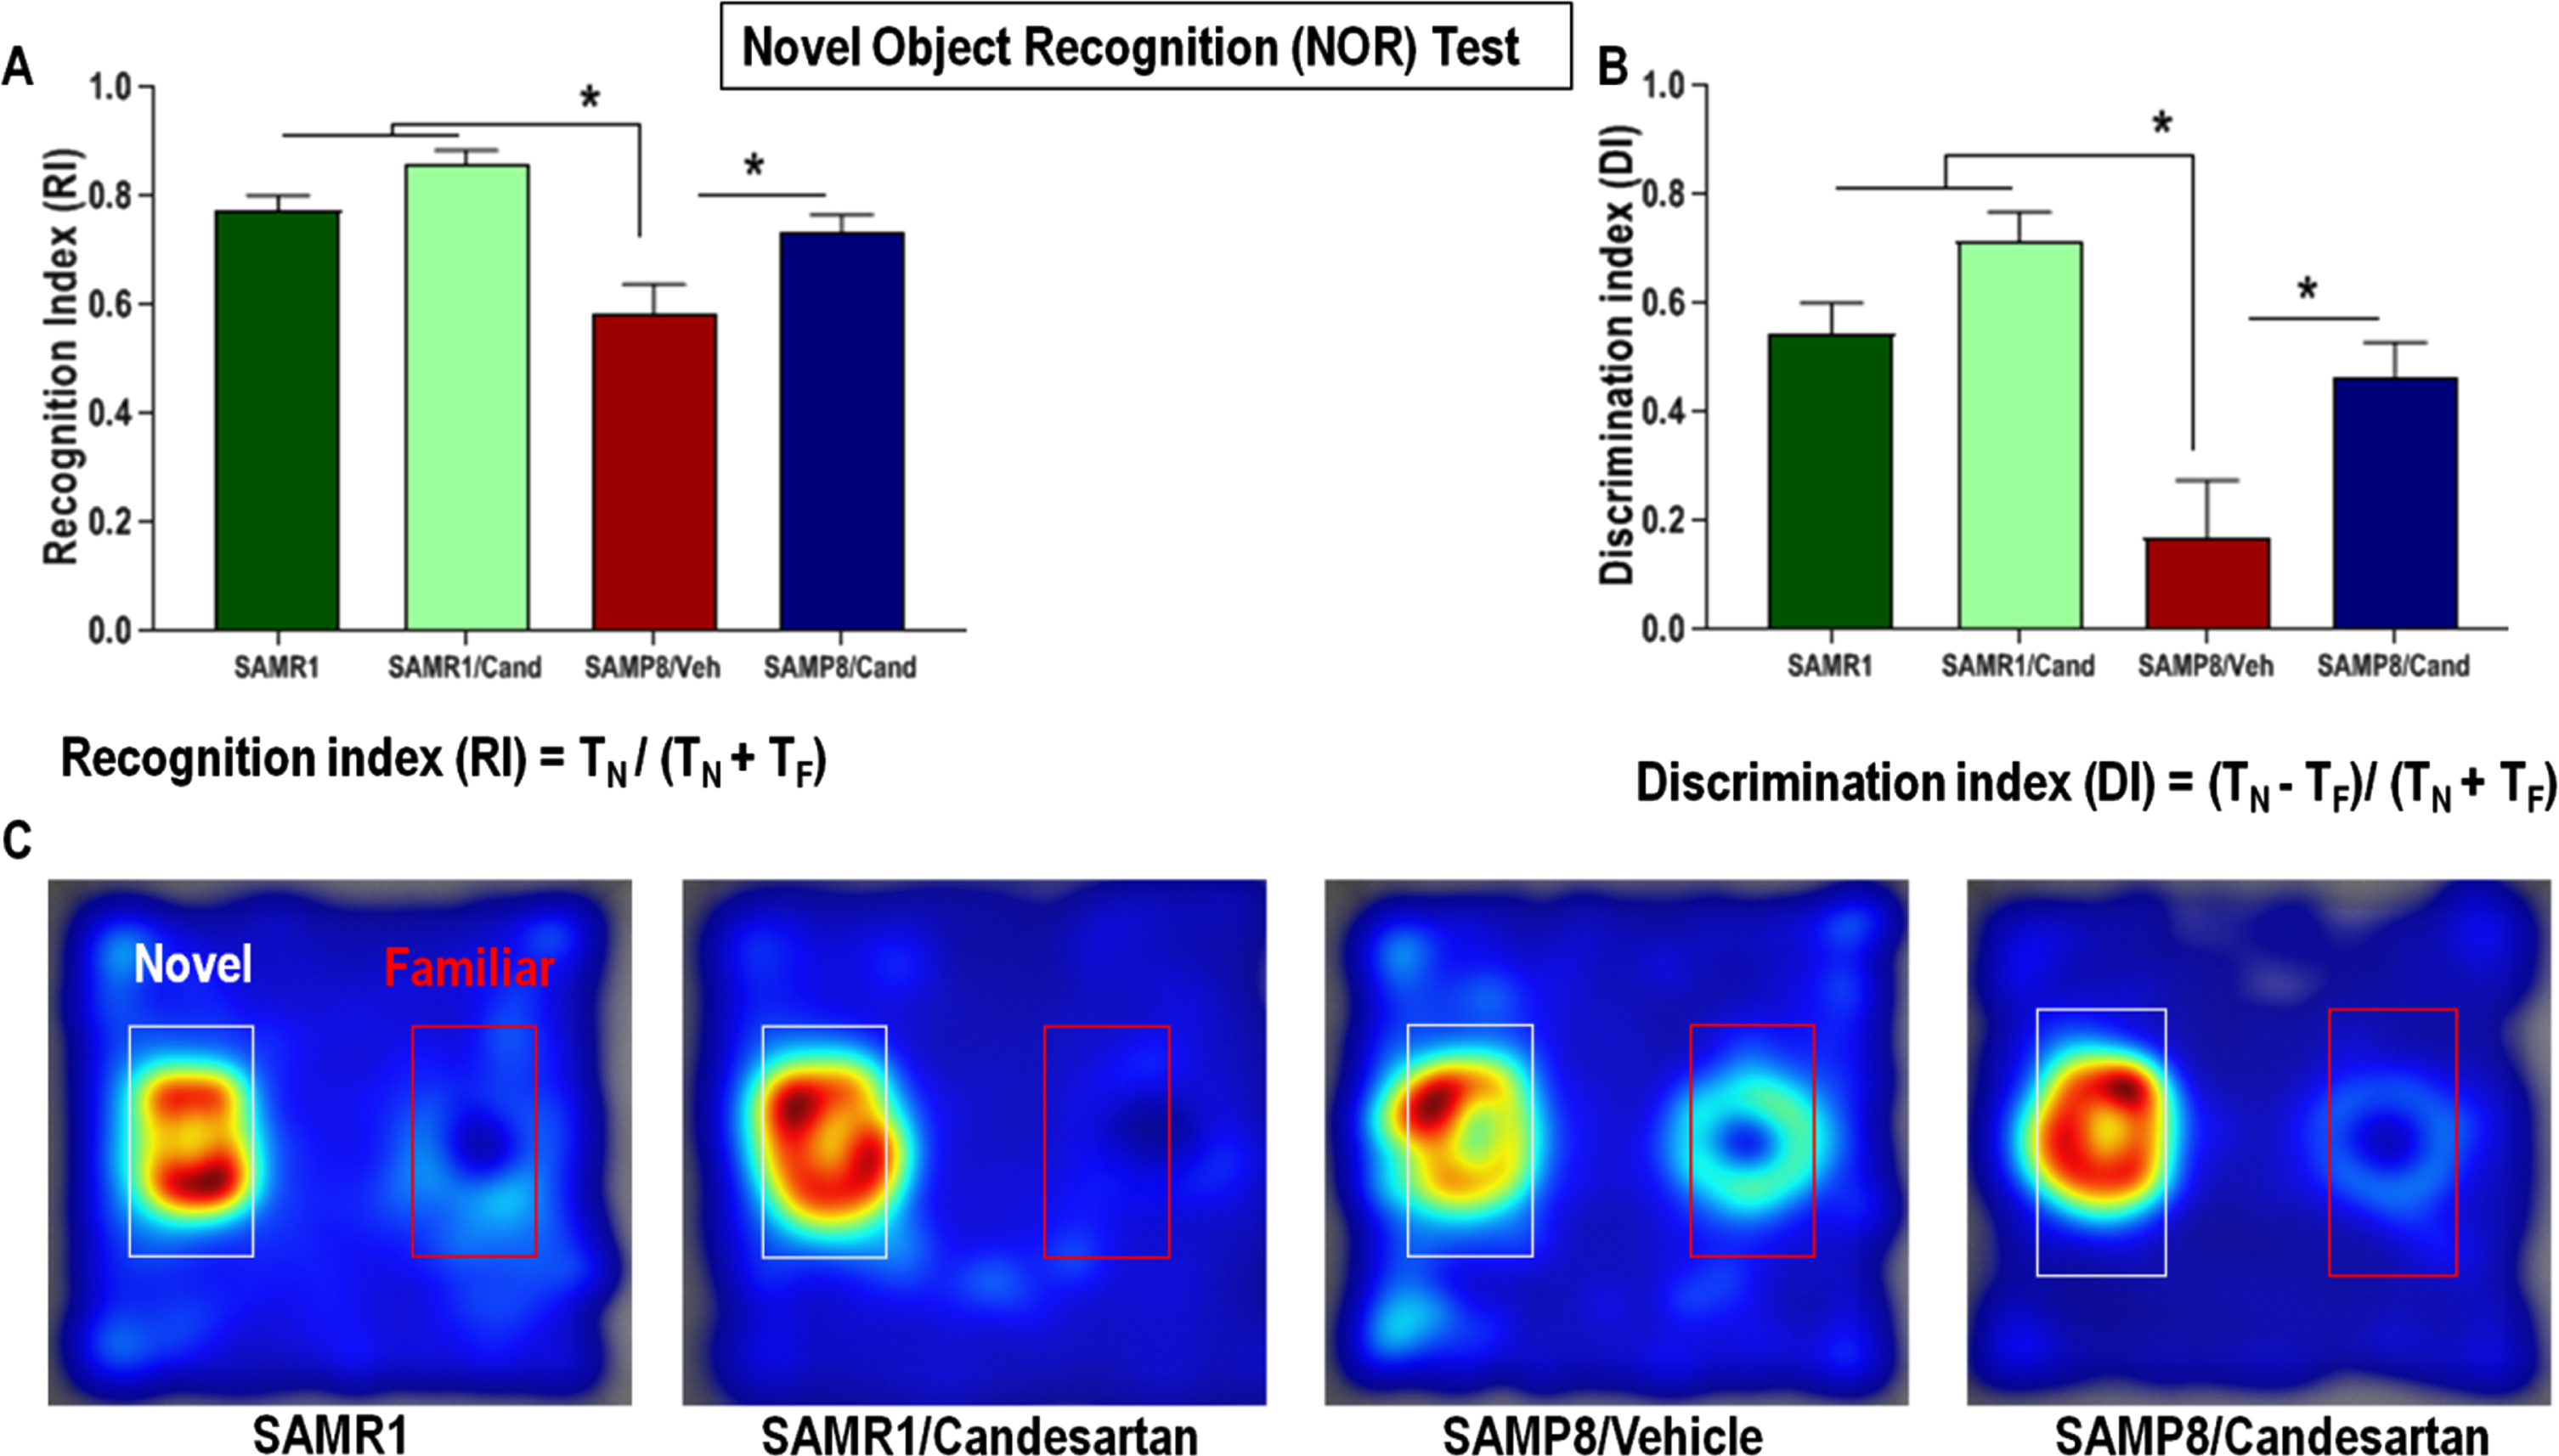 Effect of long-term candesartan treatment on non-spatial, short-term working memory in SAMR1 and SAMP8 mice. A) Recognition index (RI) - time spent exploring the novel object relative to the total time of exploration. B) Discrimination index (DI) – the difference in exploration time for the different objects to the total time of exploration. C) Heat Maps illustrating relative time spent in the various locations during the retention test. The novel object is located within the white-rimmed area. TF and TN are the times spent interacting with the familiar and novel object, respectively (n ≈ 10 animals/group,±SEM, *p < 0.05).